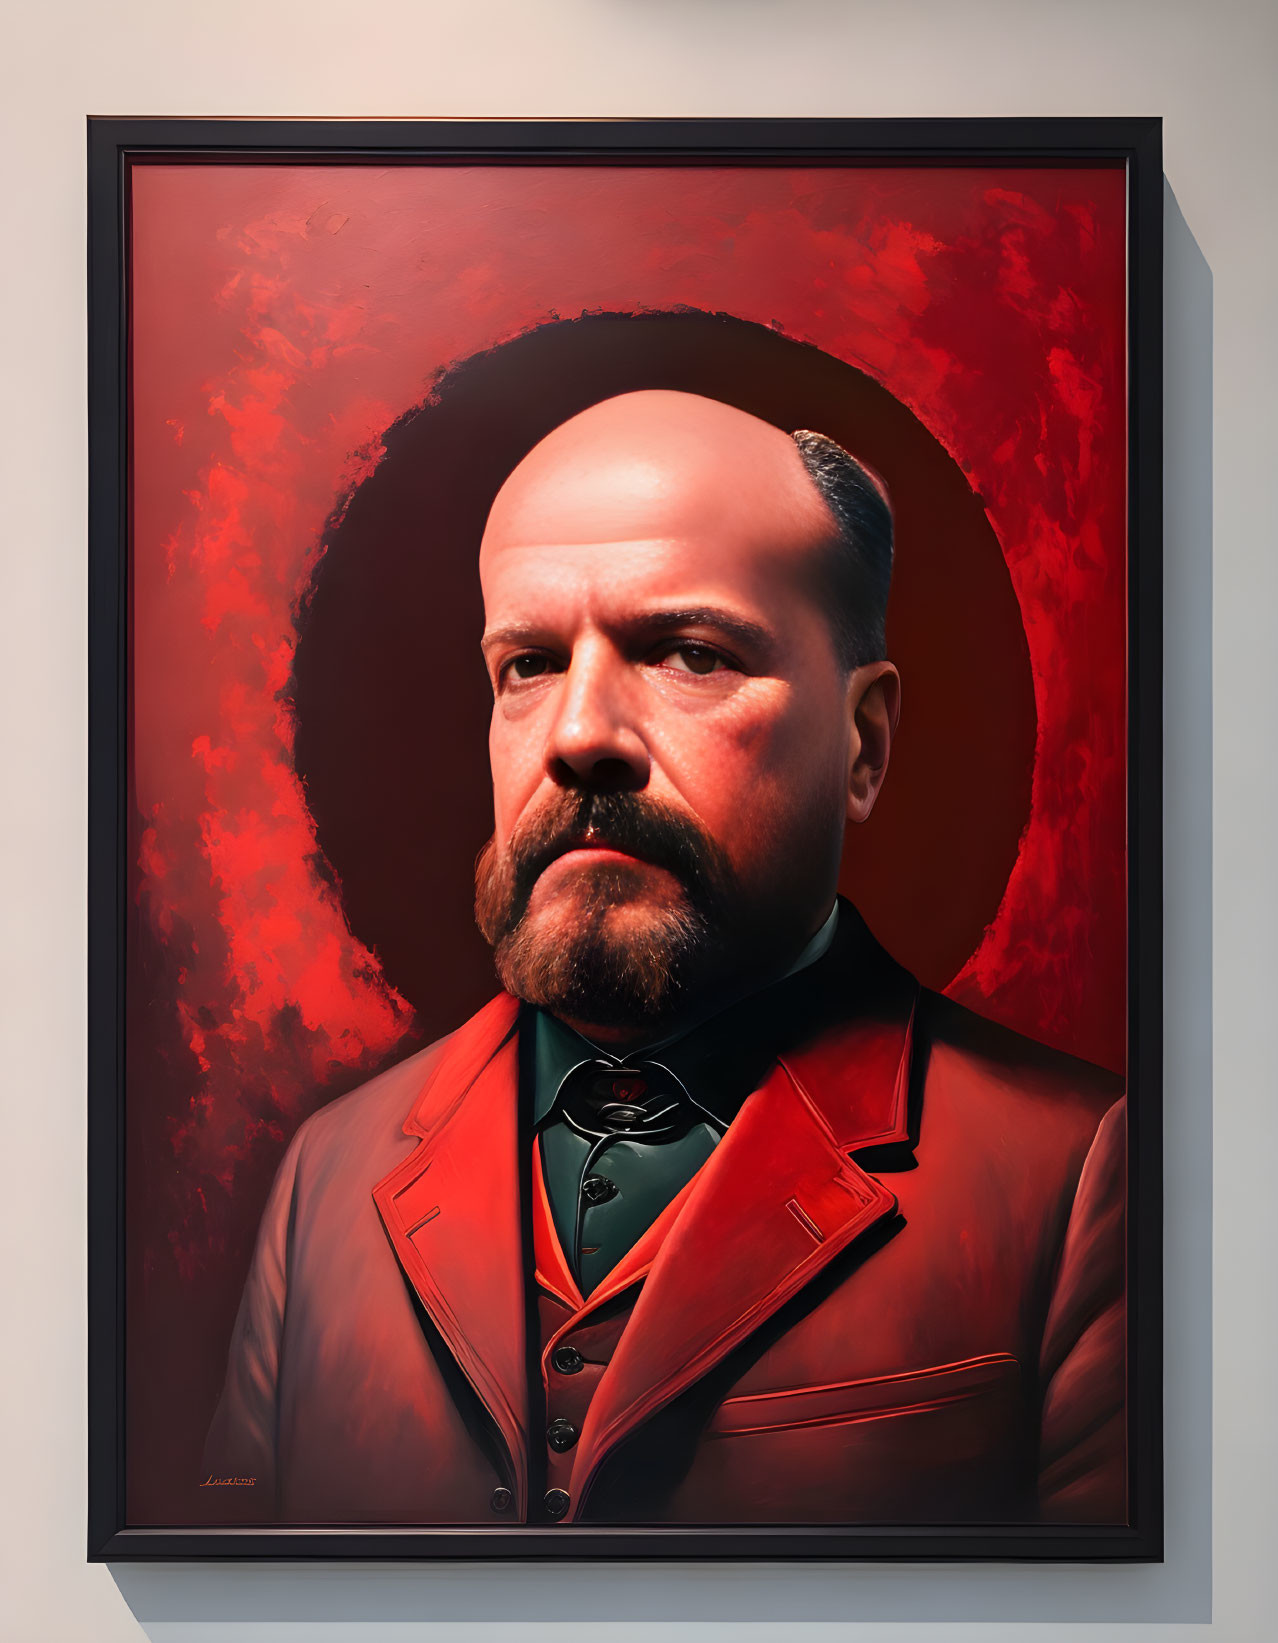 Portrait of balding man in red suit with beard against dark red background